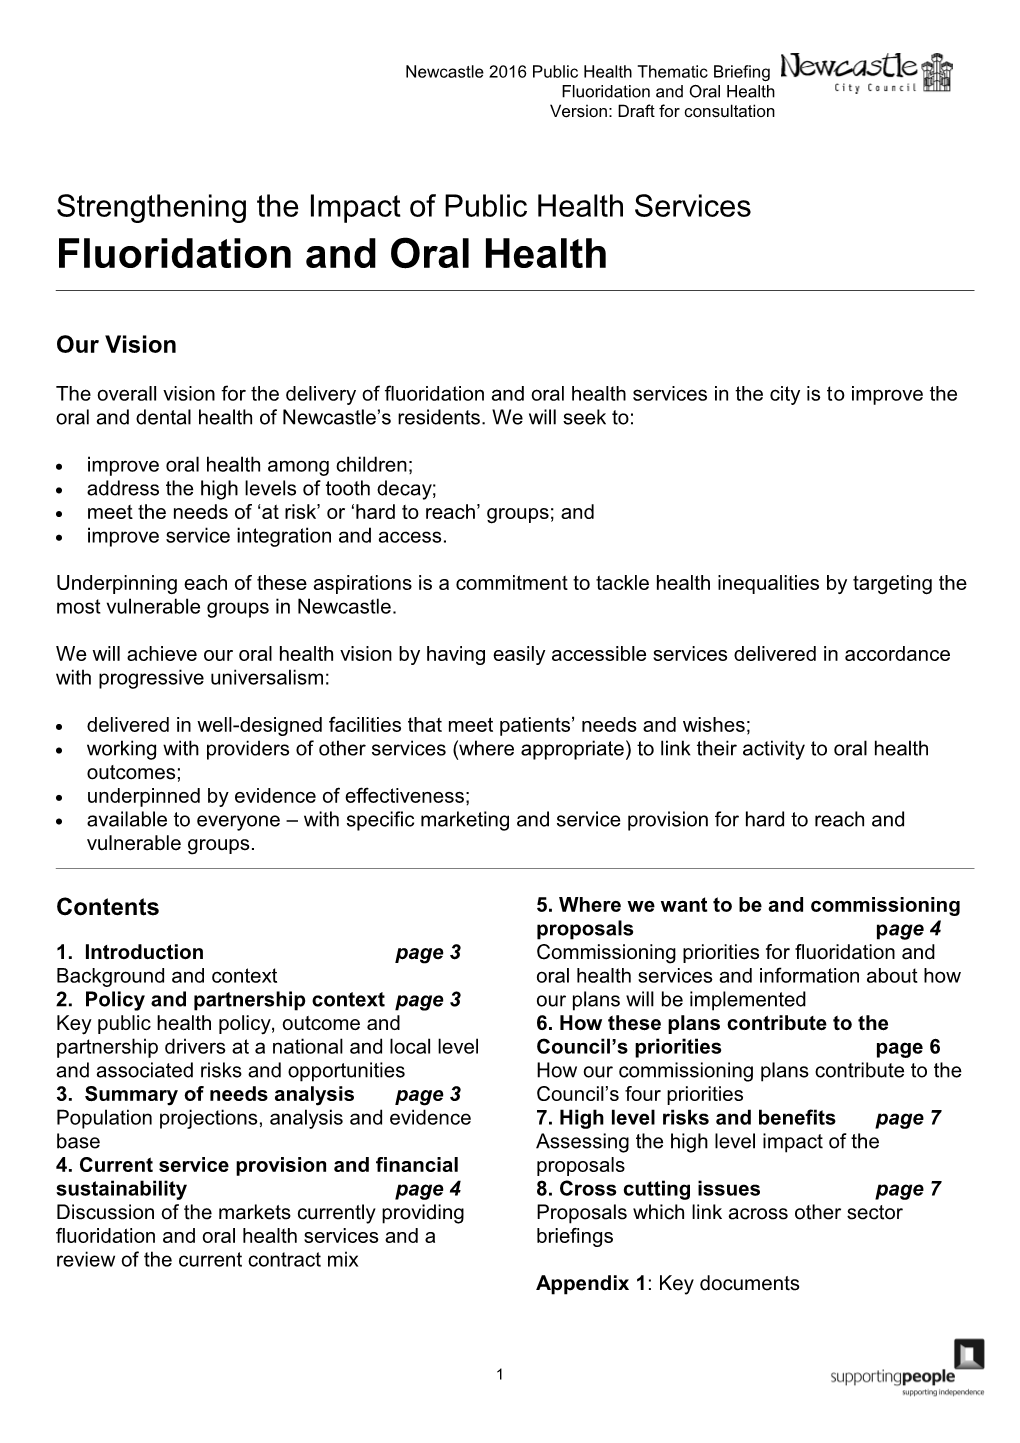 Fluoridation and Oral Health